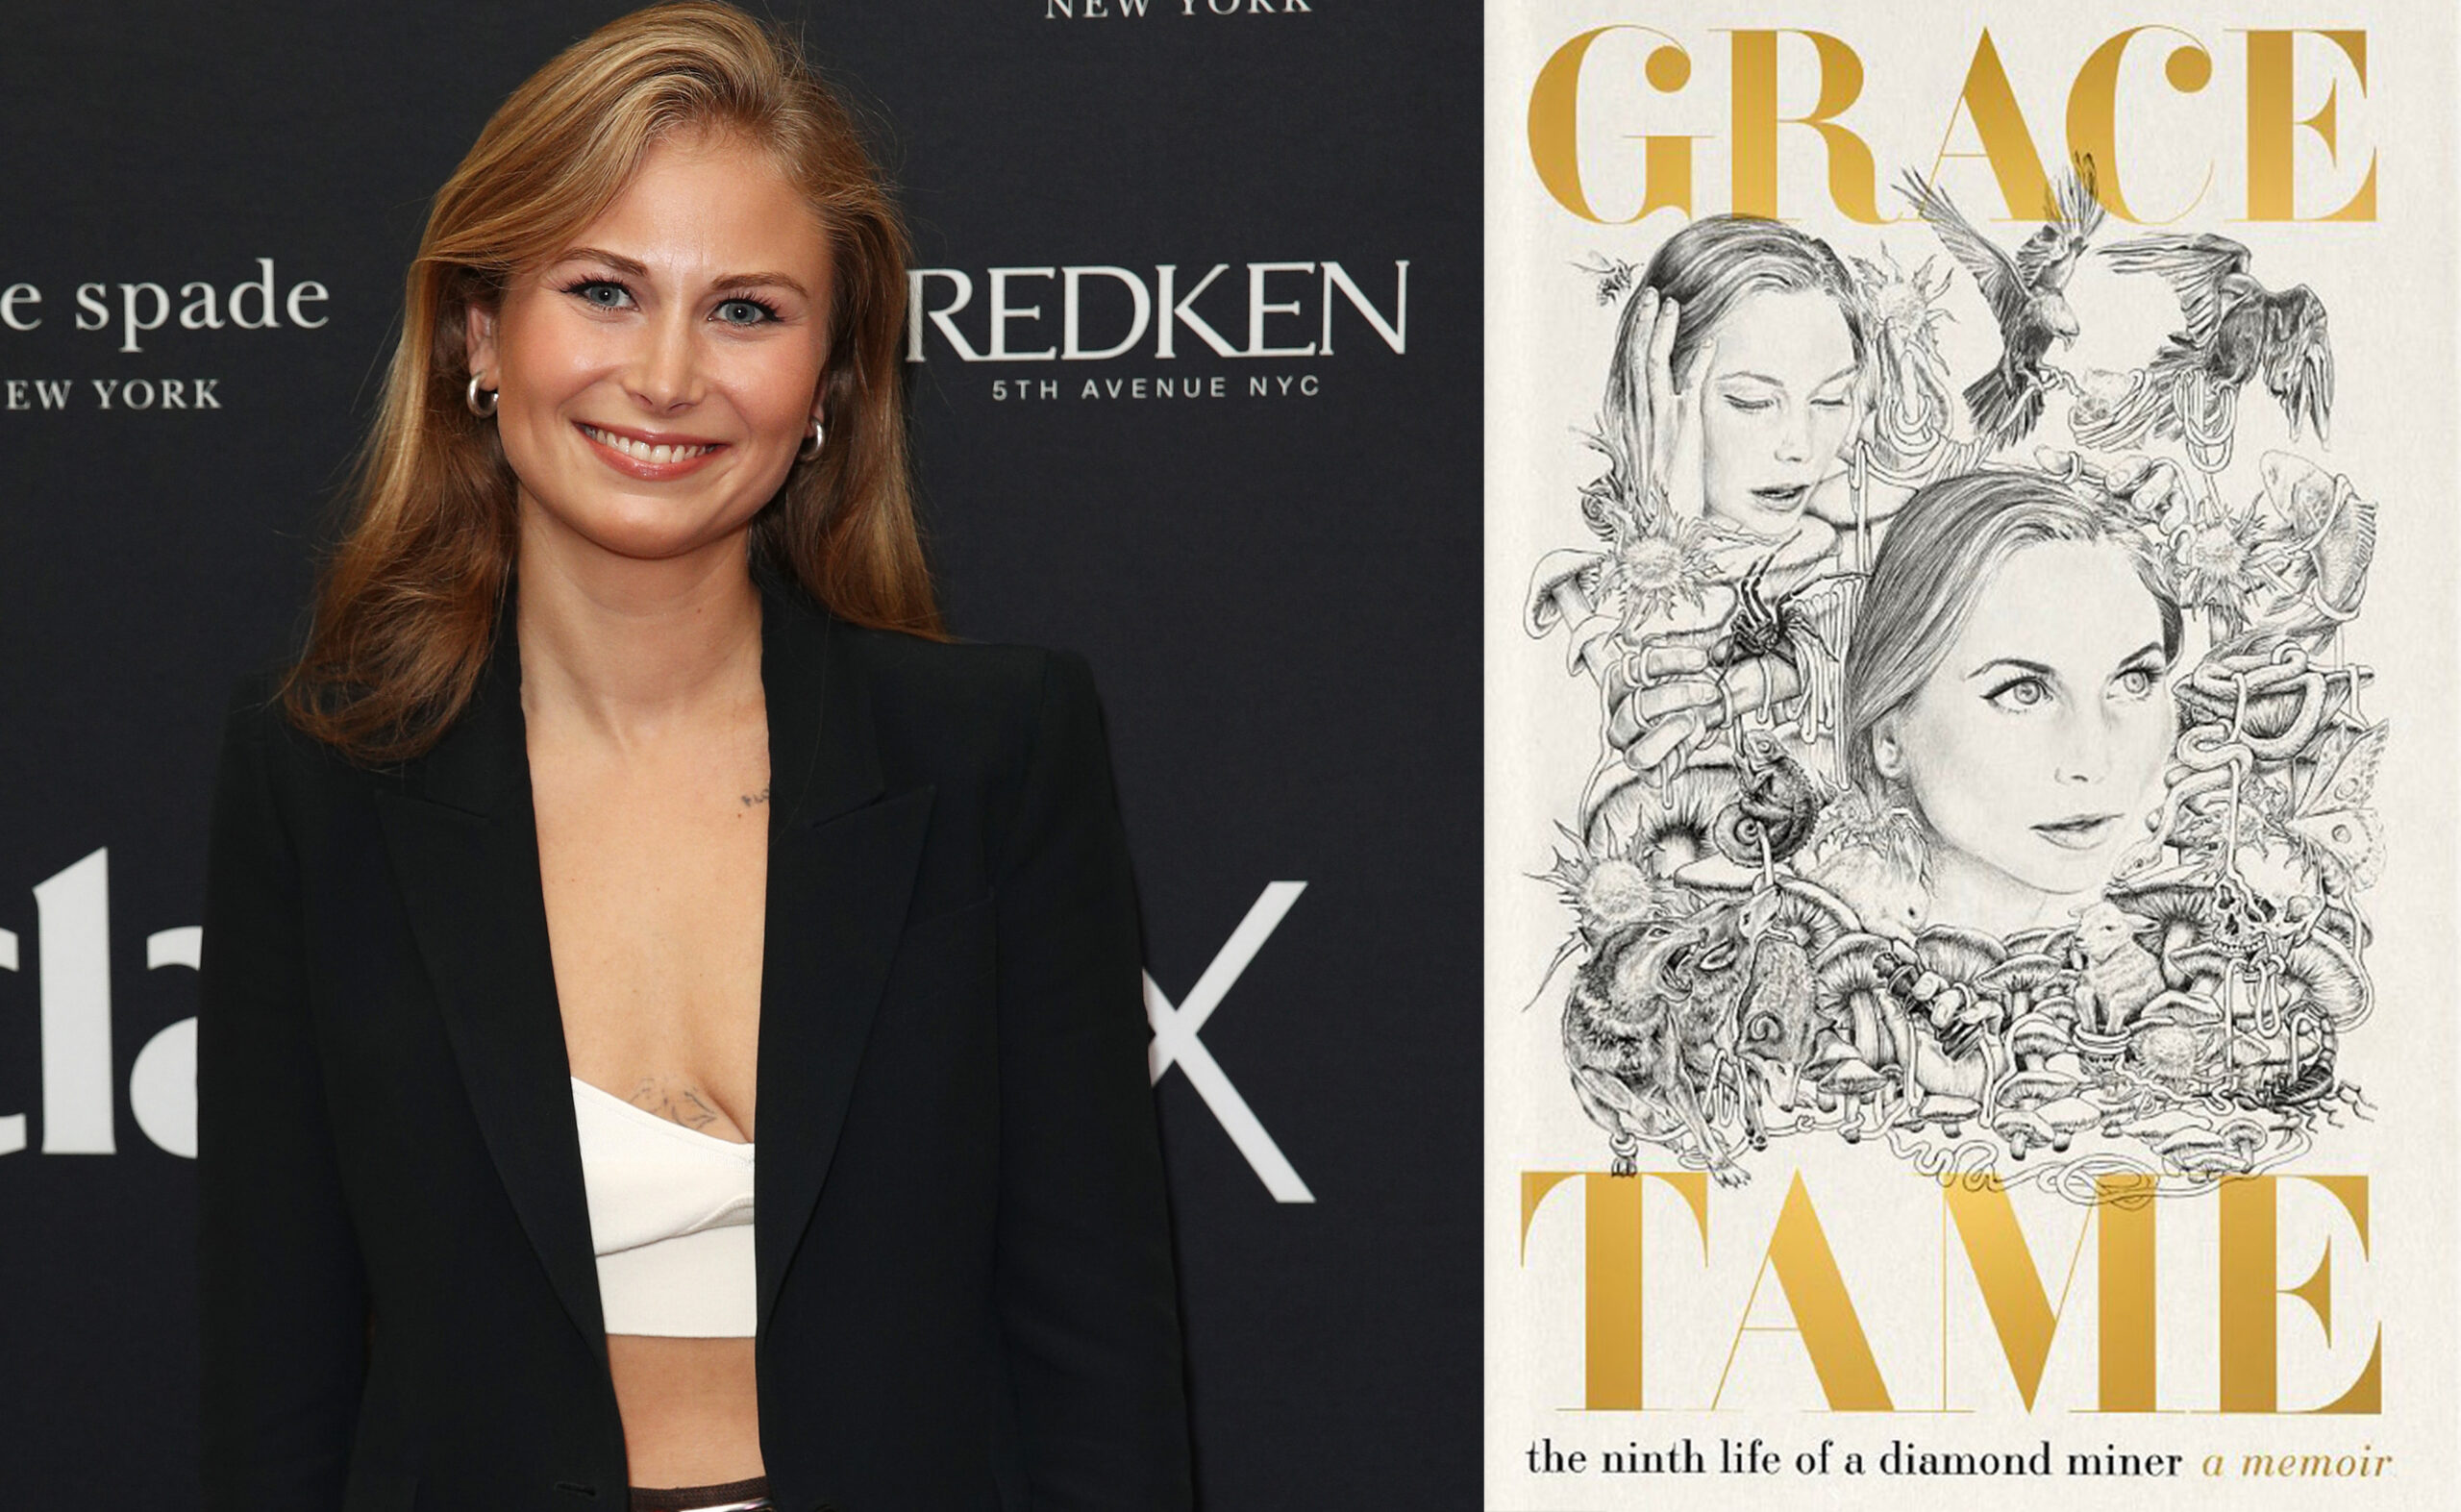 Grace Tame shows off her unexpected talent while announcing she’s written a book